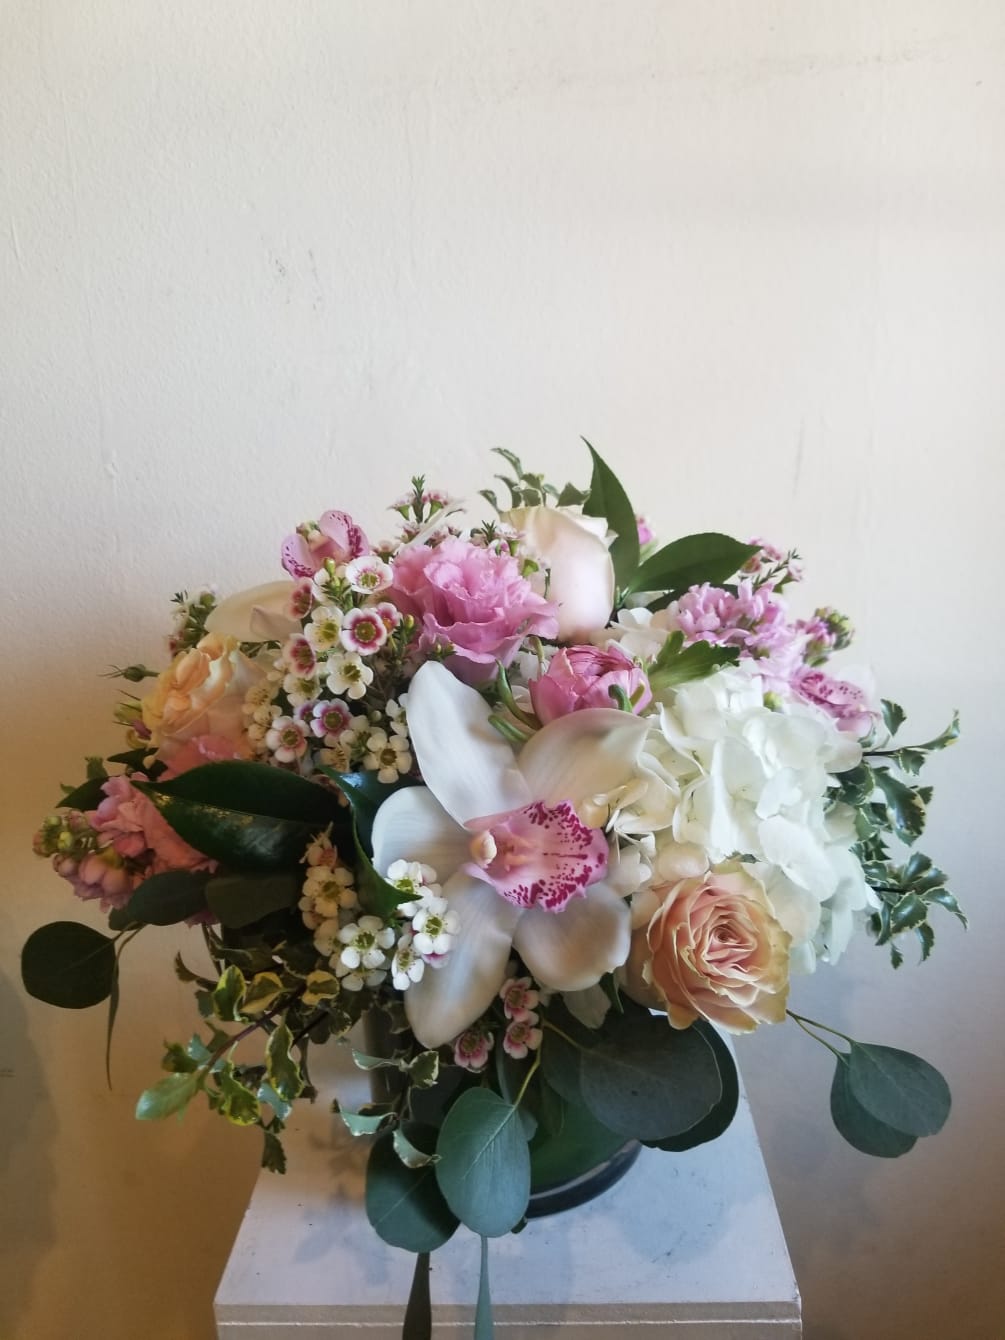 Beautiful mixture of white and pink including, roses, hydrangea, orchids, and complimentary